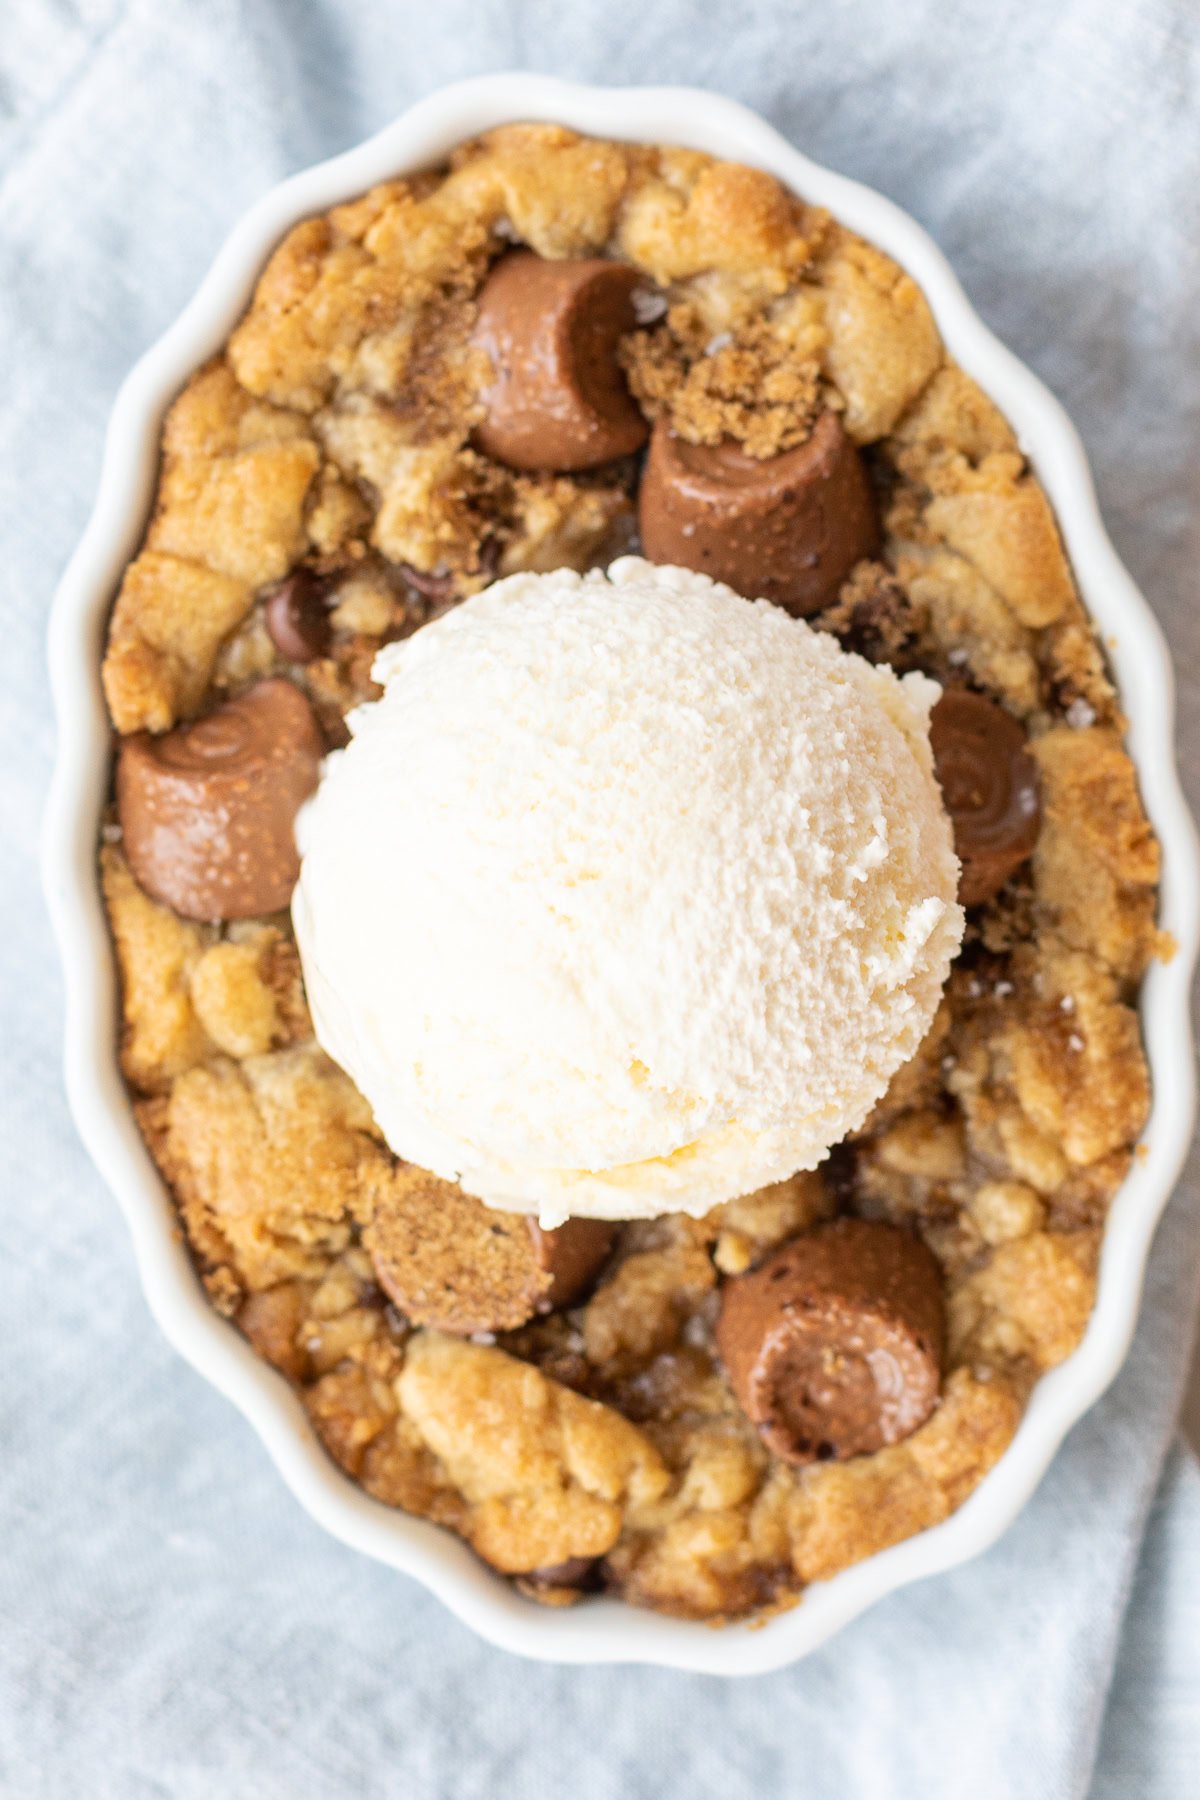 A chocolate chip cobbler topped with a scoop of vanilla ice cream, featuring a crumbly, golden-brown base with pieces of chocolate.